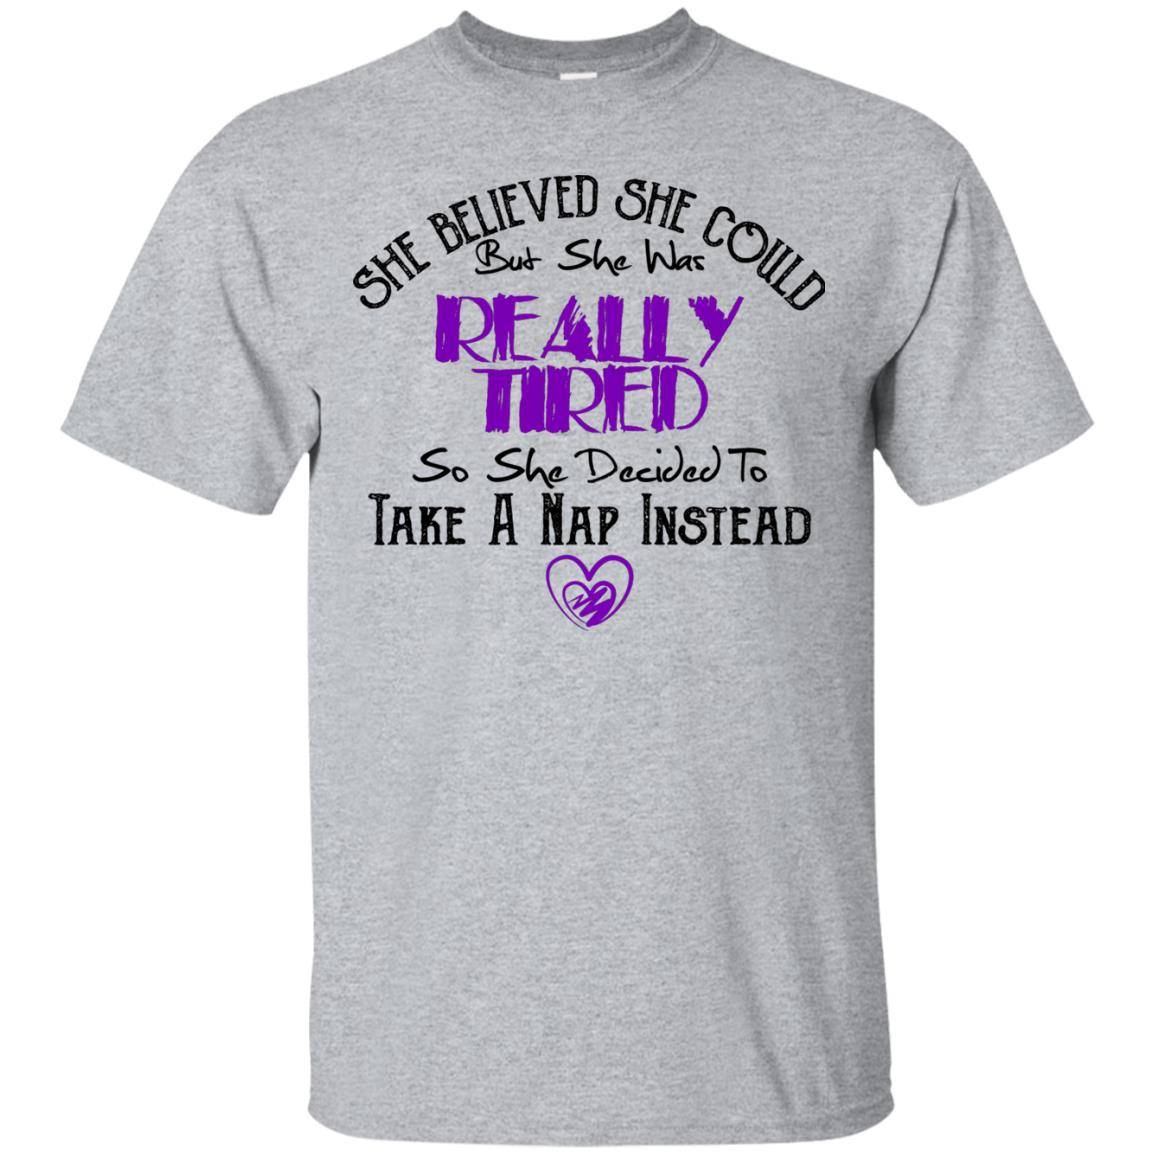 Funny T-Shirt for Her - She Believed She Could But She Was Tiered - GoneBold.gift